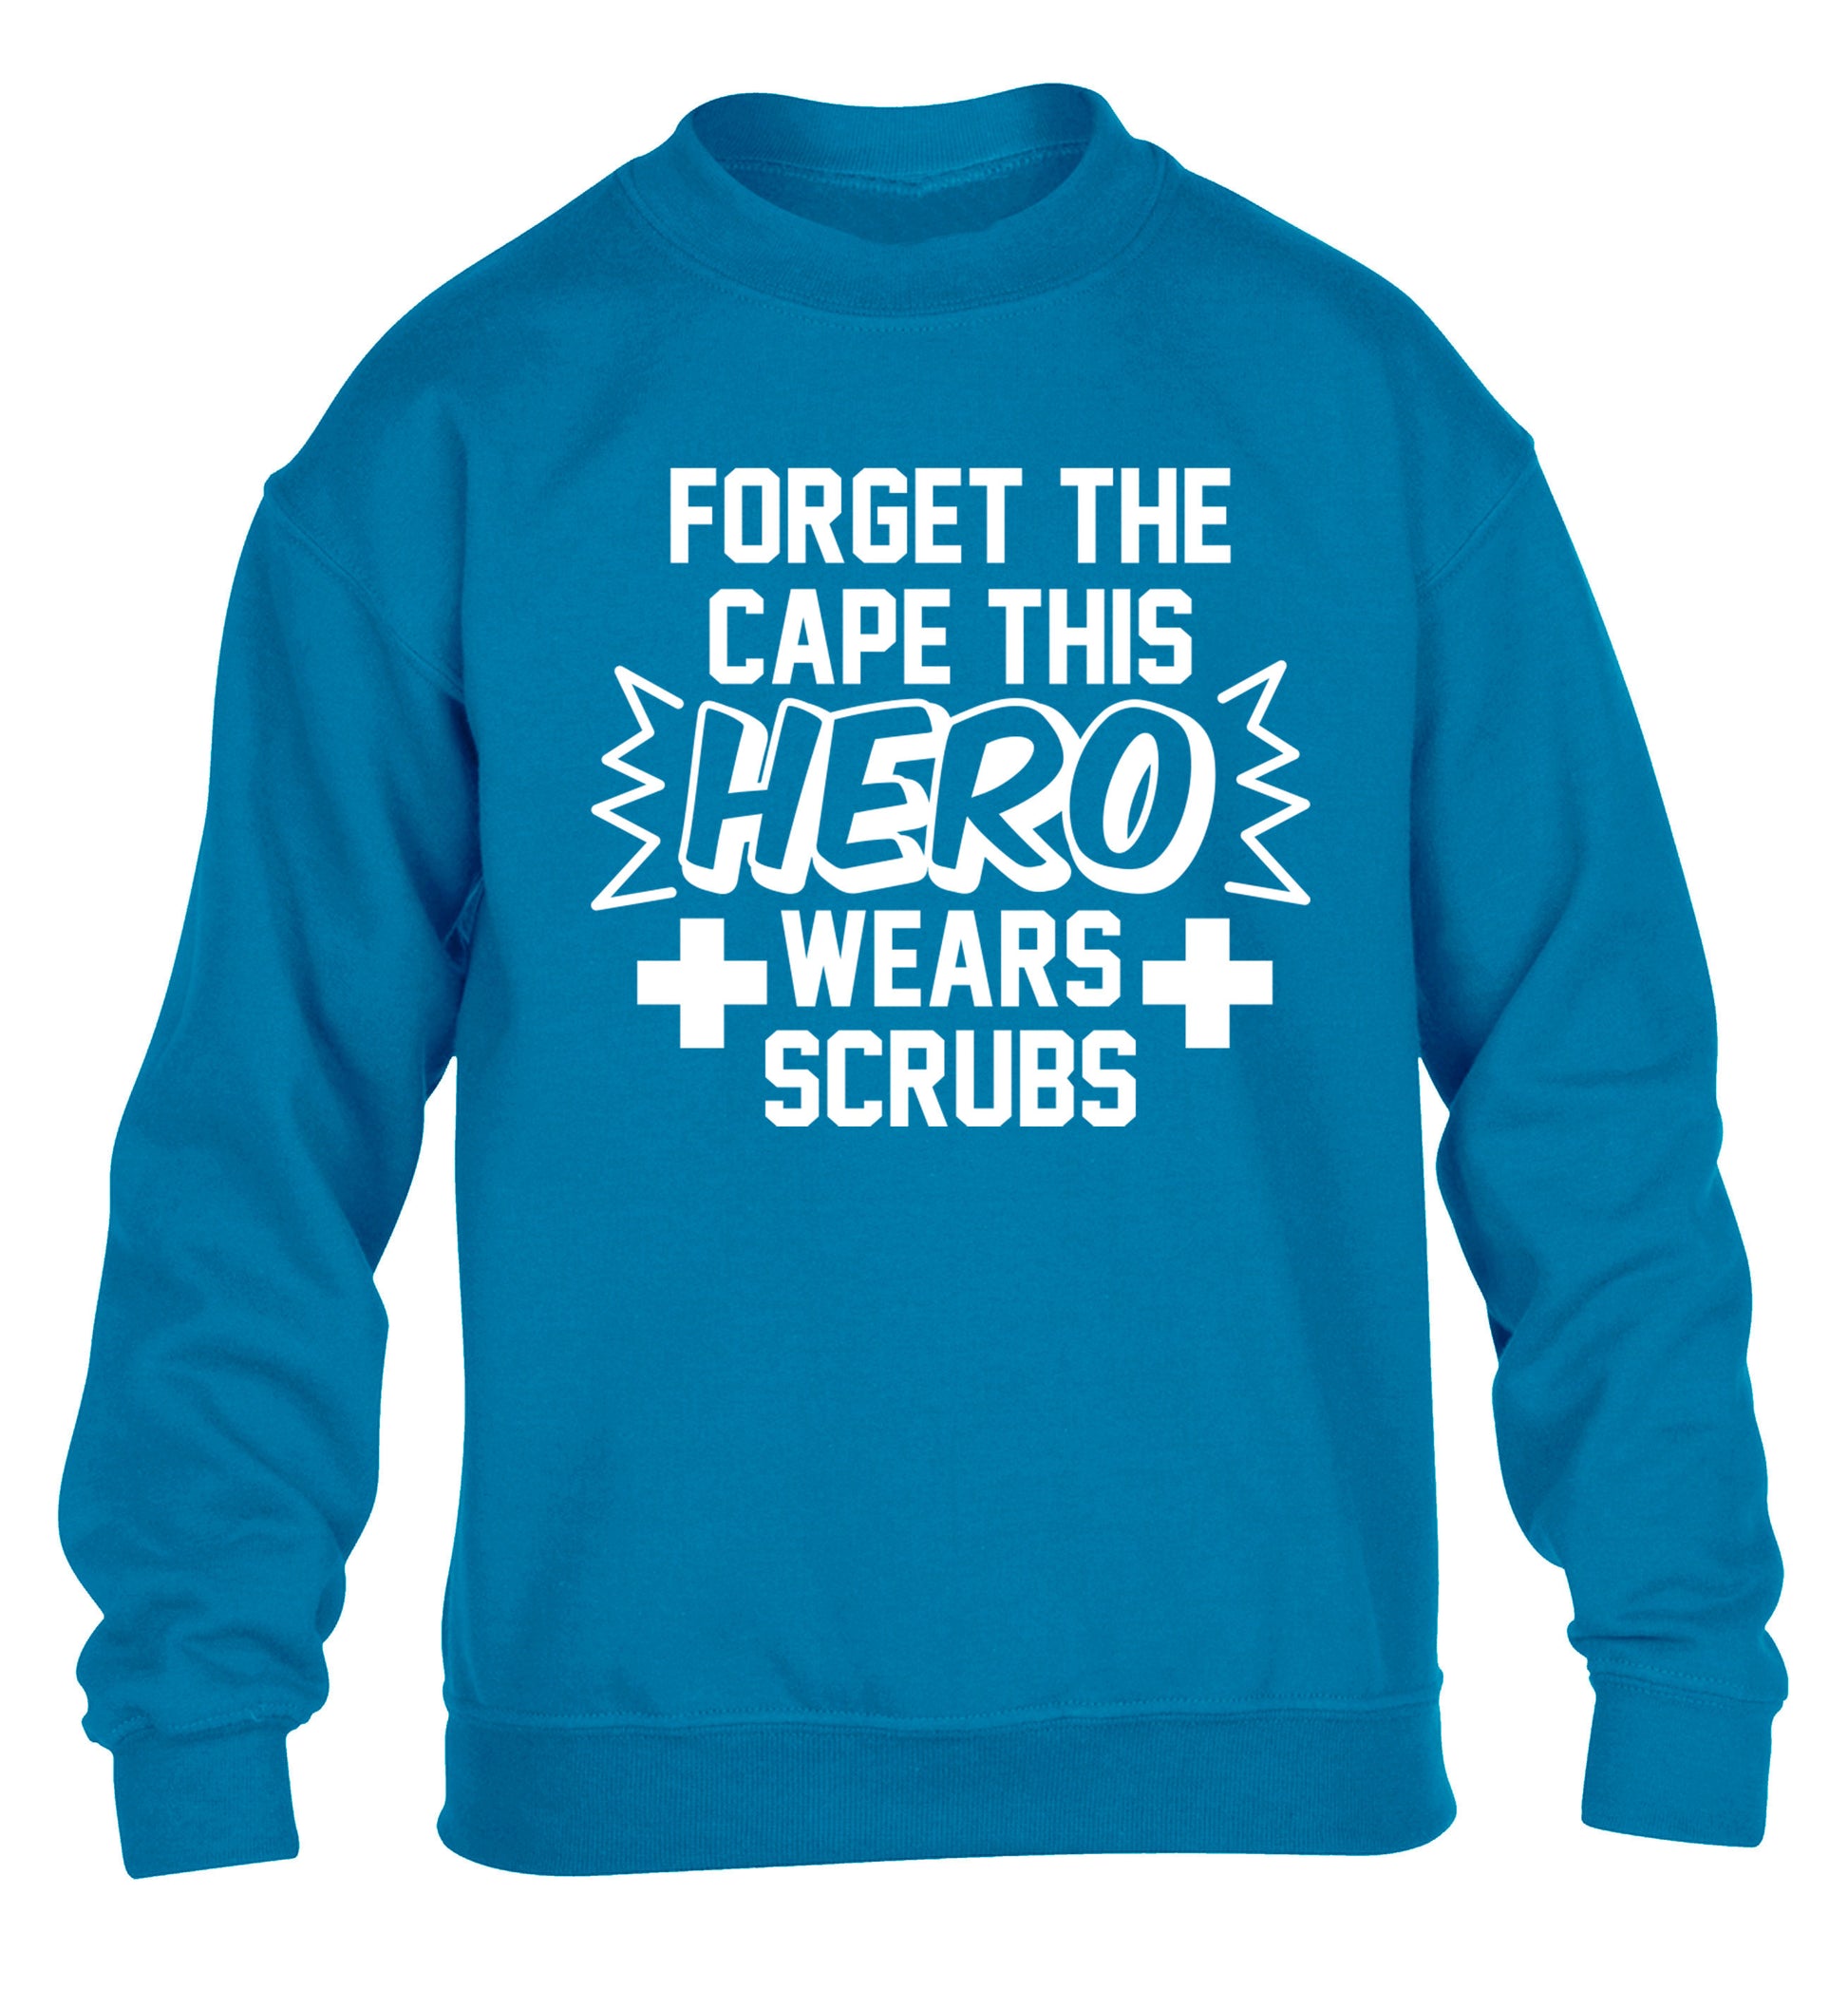 Forget the cape this hero wears scrubs children's blue sweater 12-14 Years